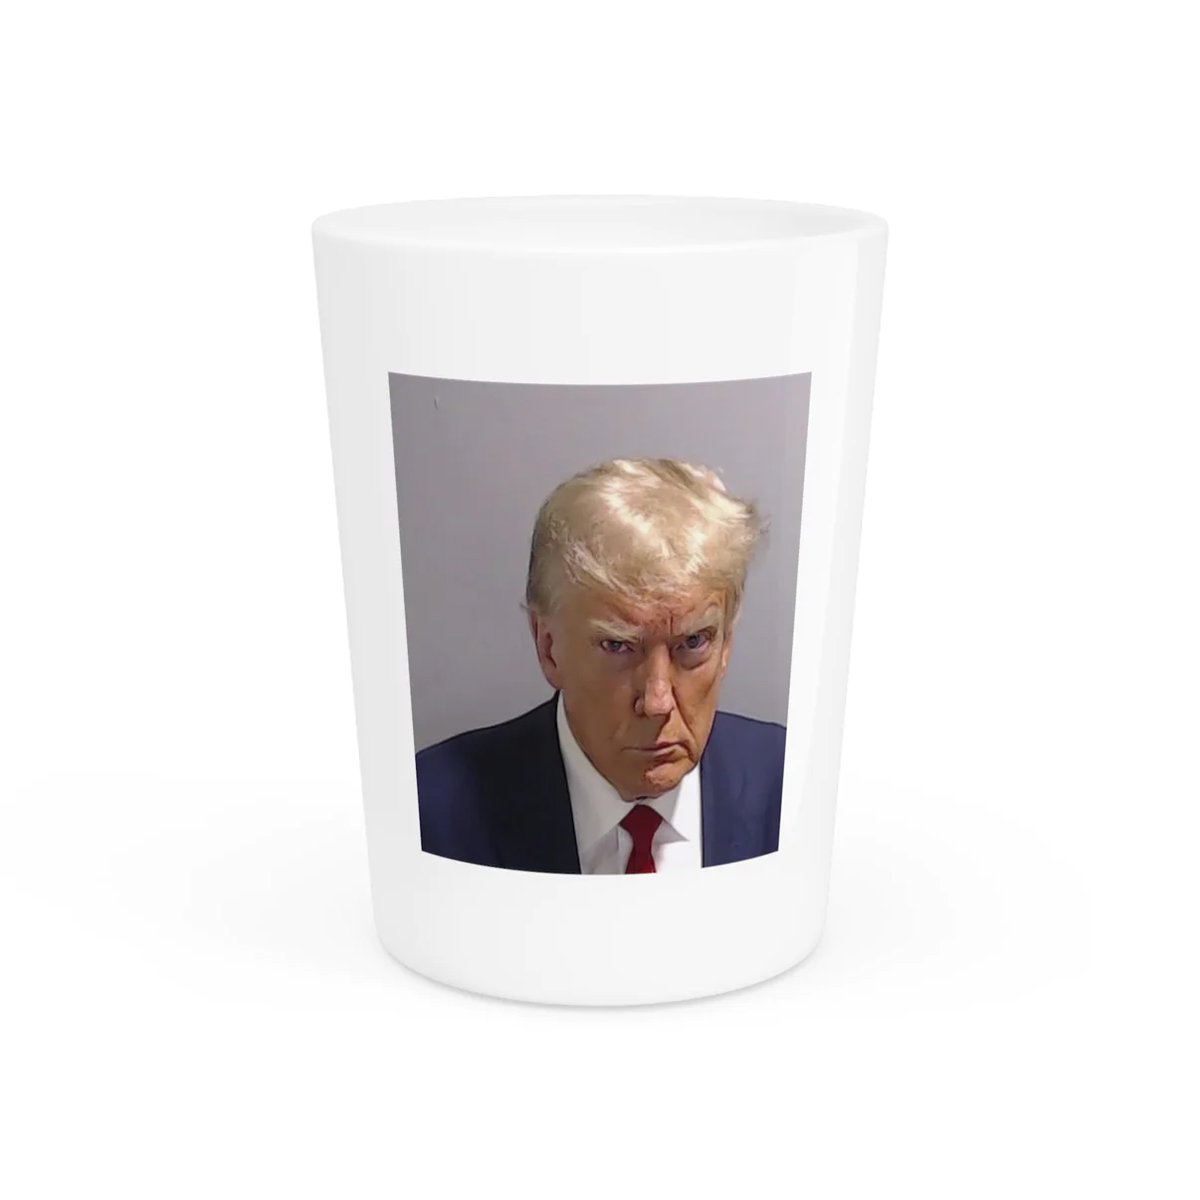 Donald Trump's face on a shot glass